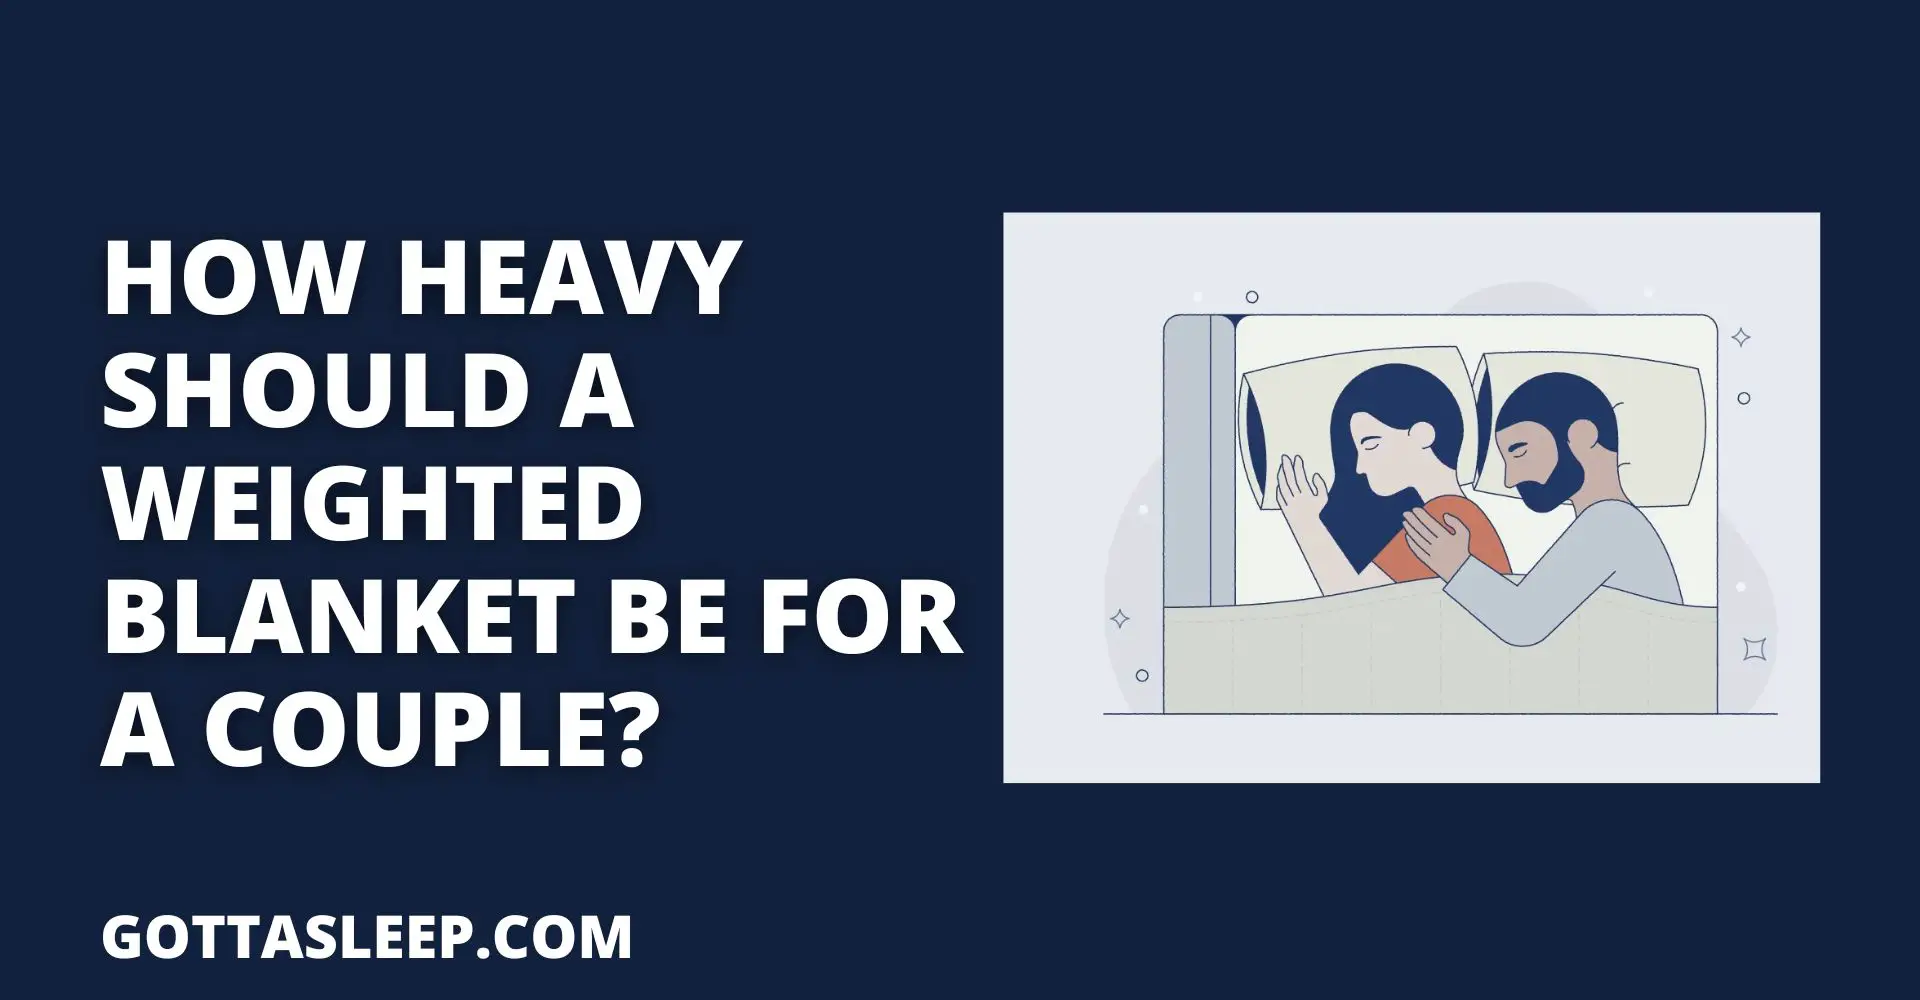 How Heavy Should a Weighted Blanket be for a Couple?